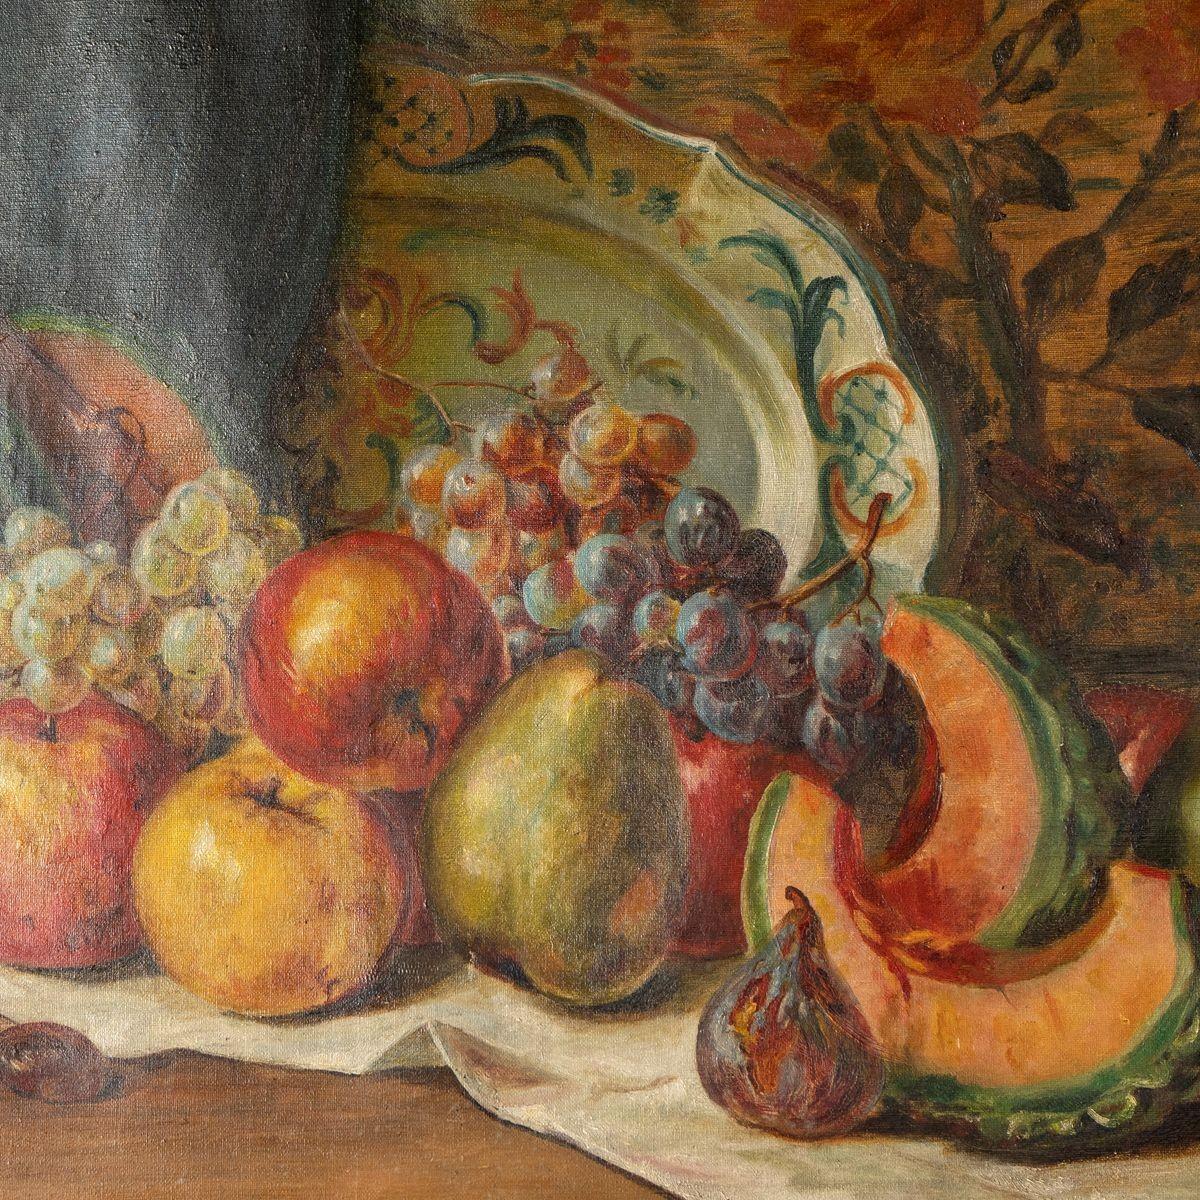 Antique Original Oil on Canvas Painting

Depicting an abundance of fruit on a kitchen table including melons, pomegranates and figs amongst other fruits along with a wonderful antique charger, fruit knife and an obligatory glass of red